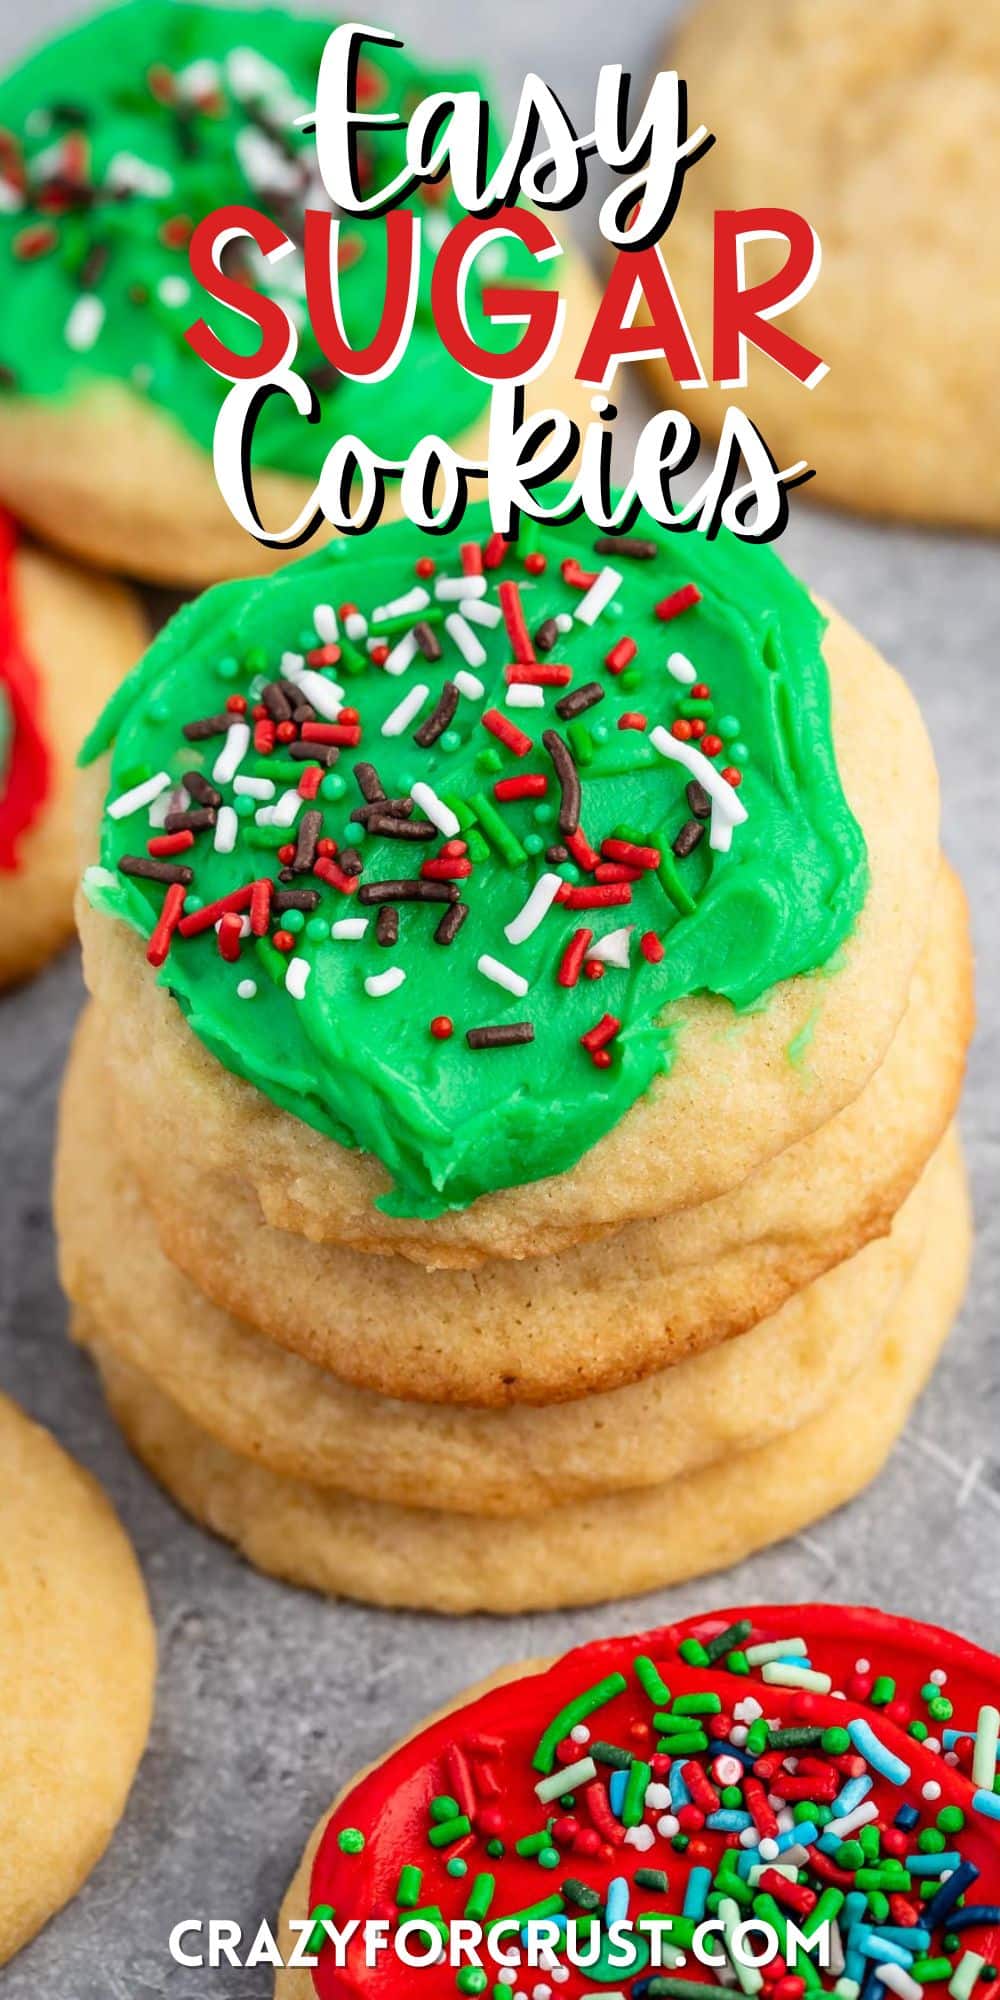 stacked cookies with green and red frosting with green and red sprinkles on top with words on the image.